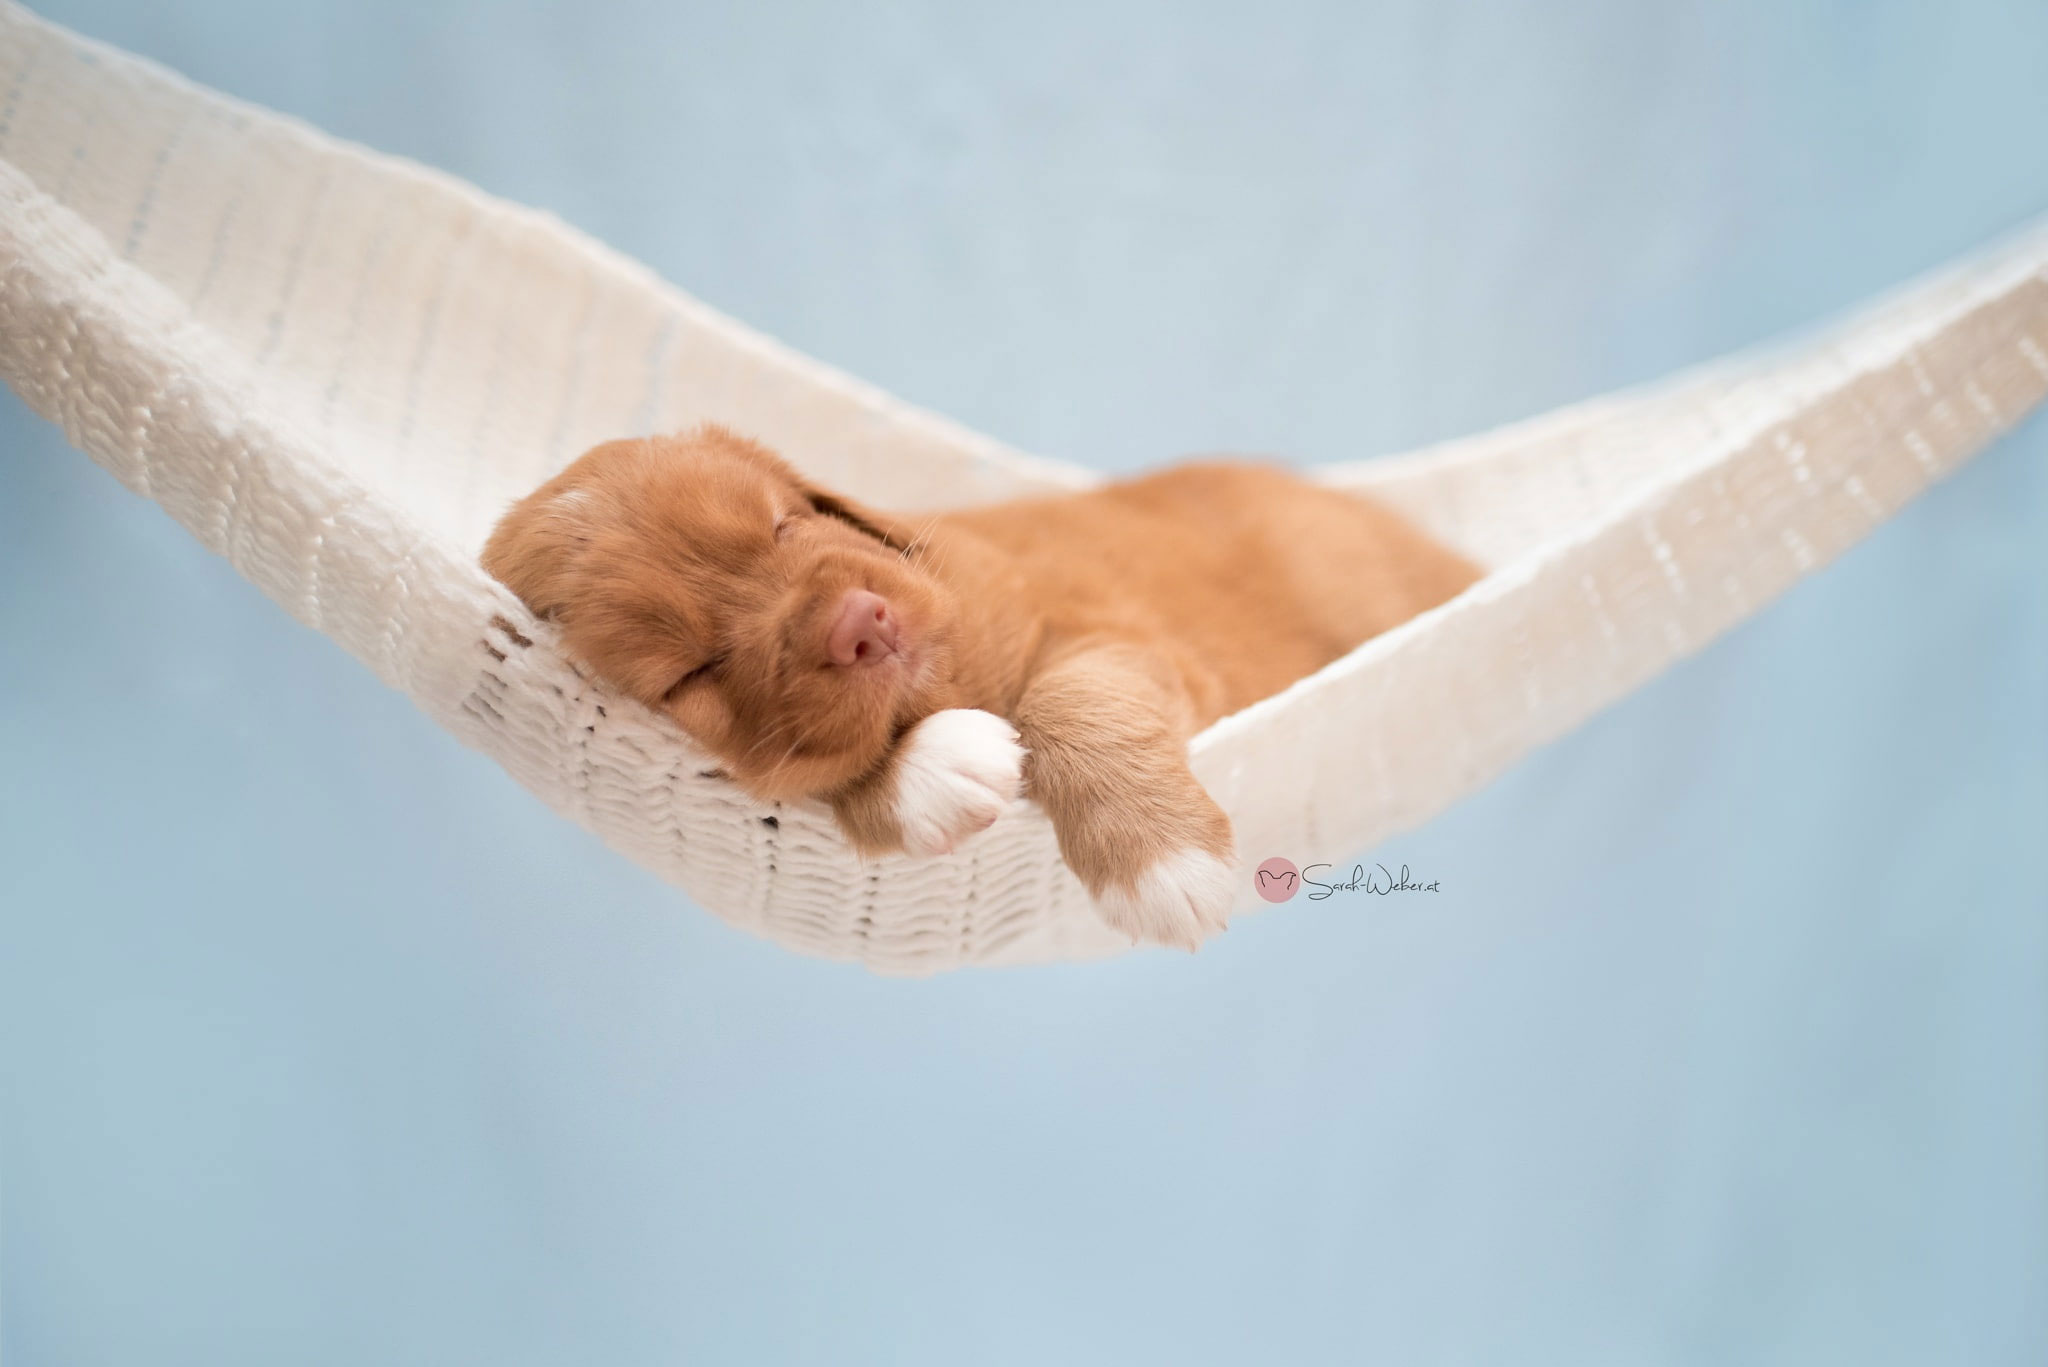 Sleeping Animals Images Wallpapers